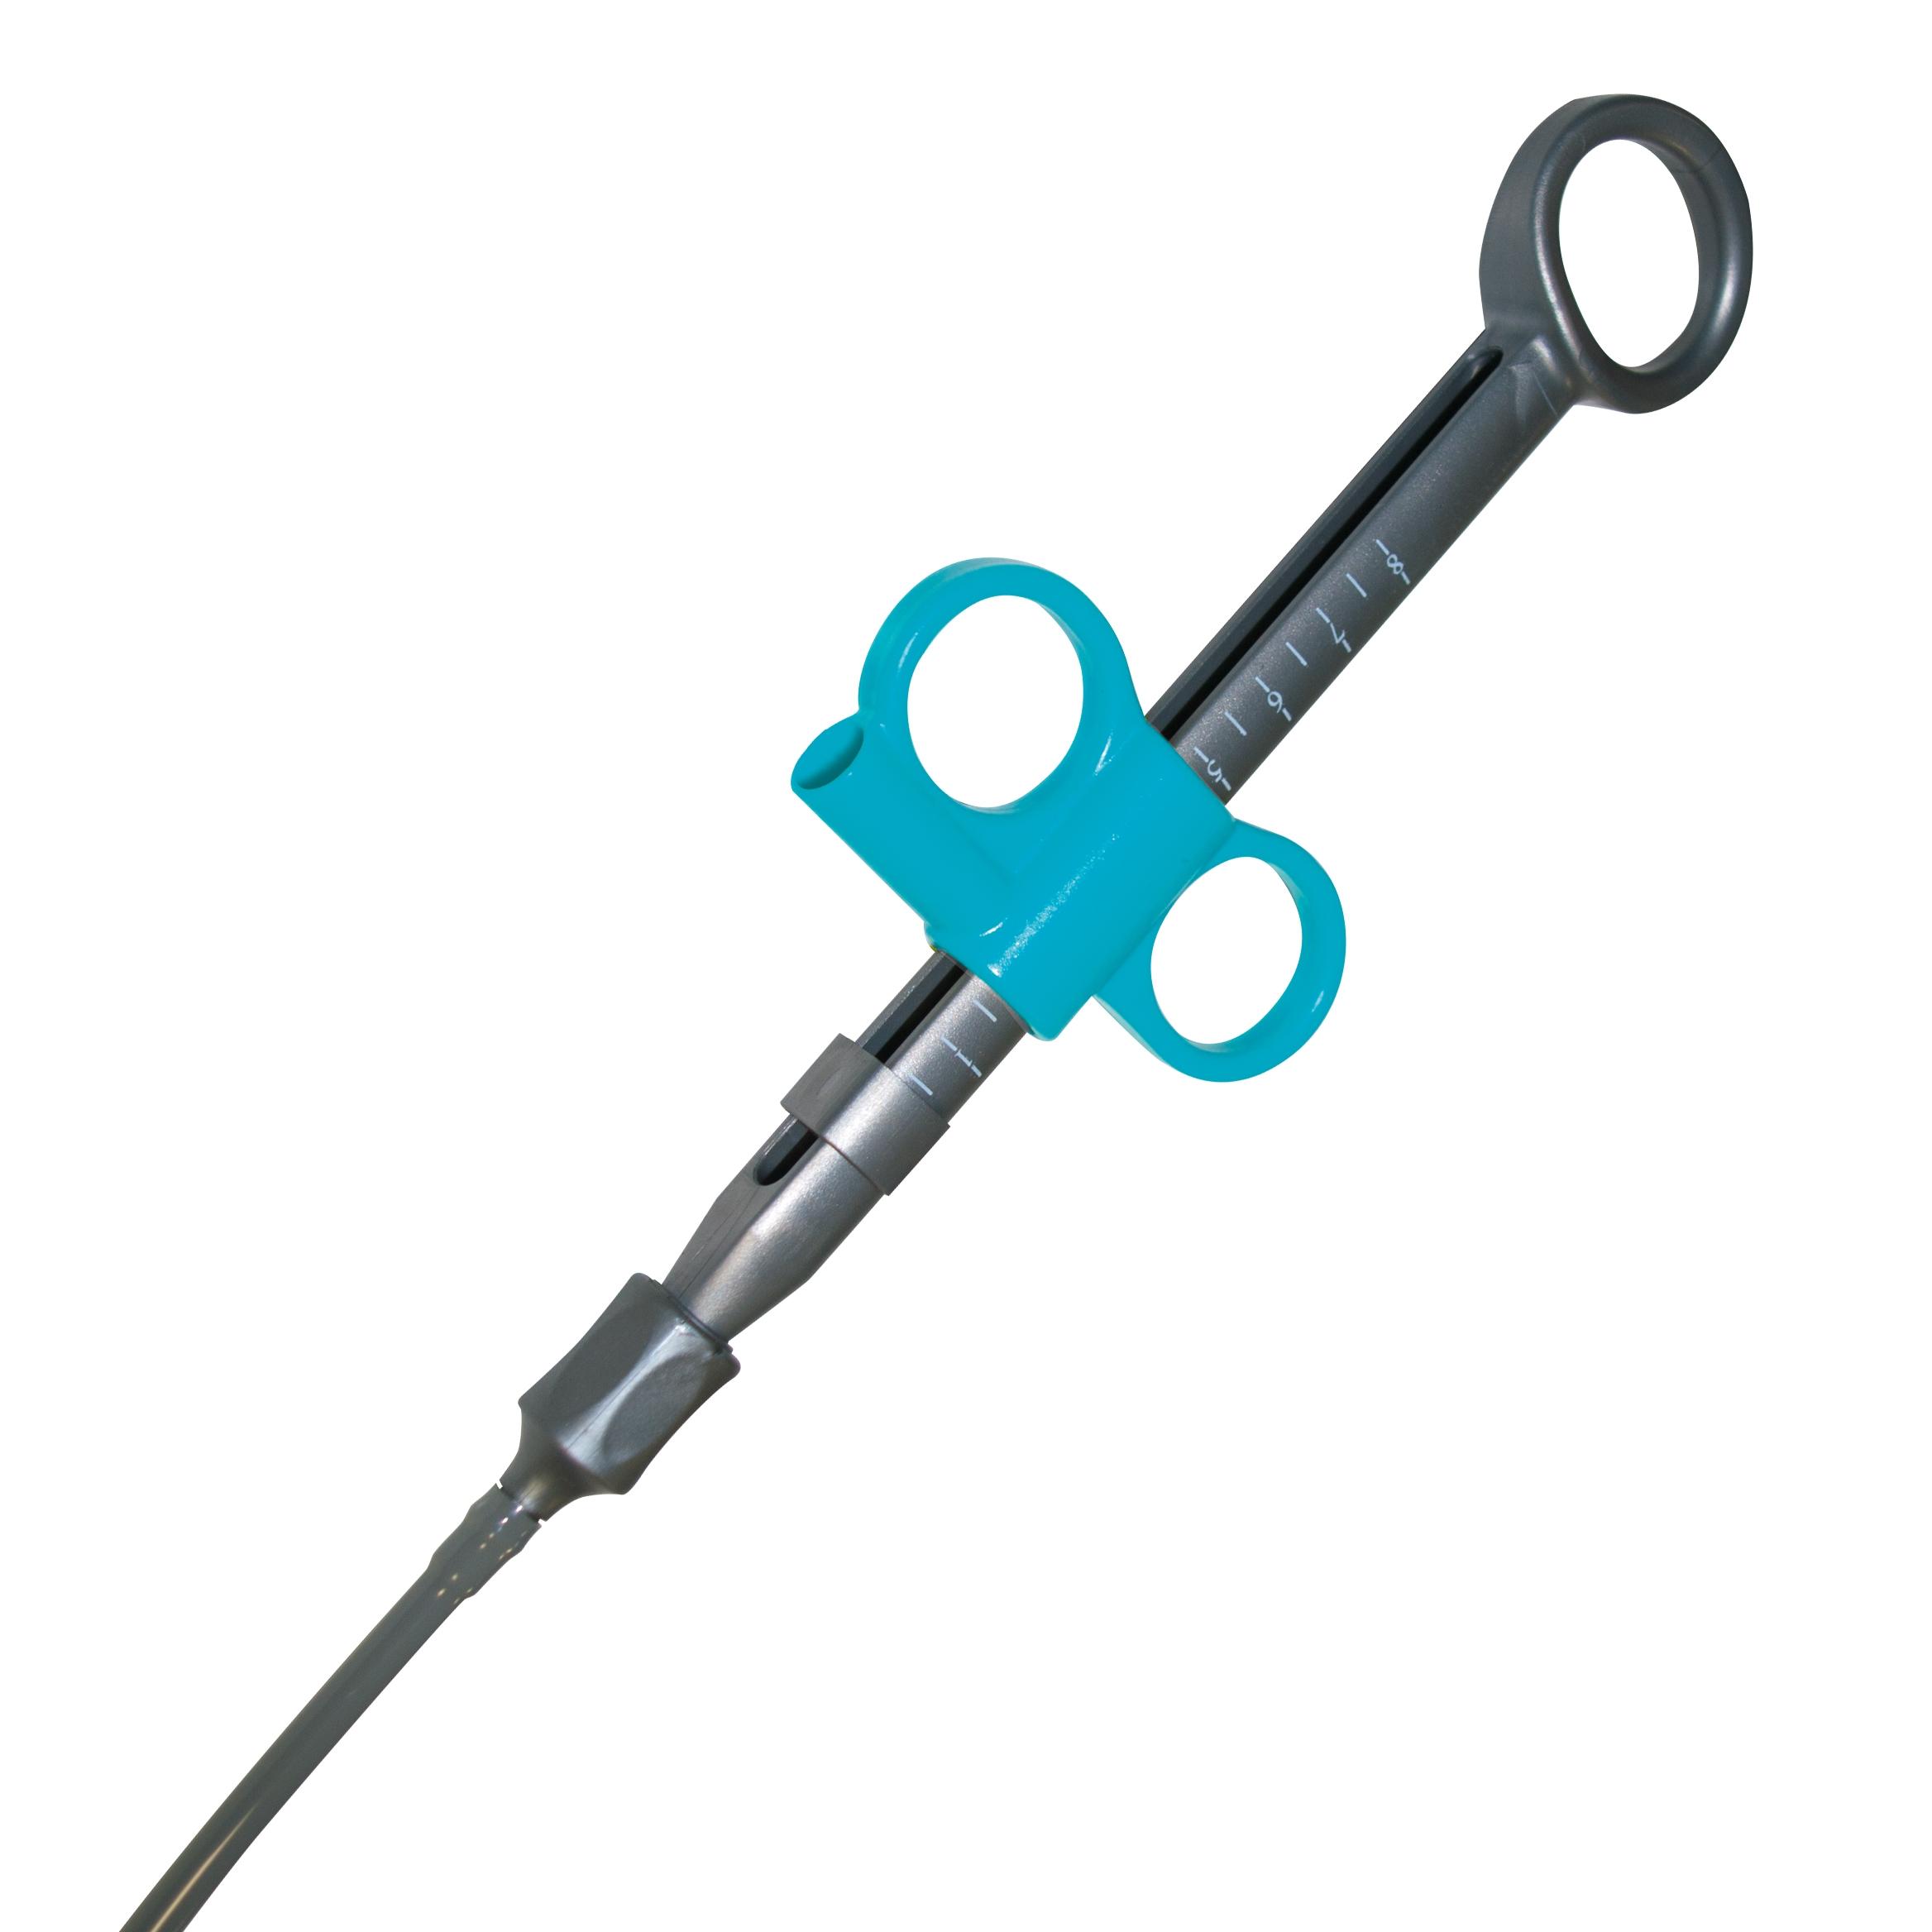 NeoSnareCold® and Hybrid® polypectomy handle